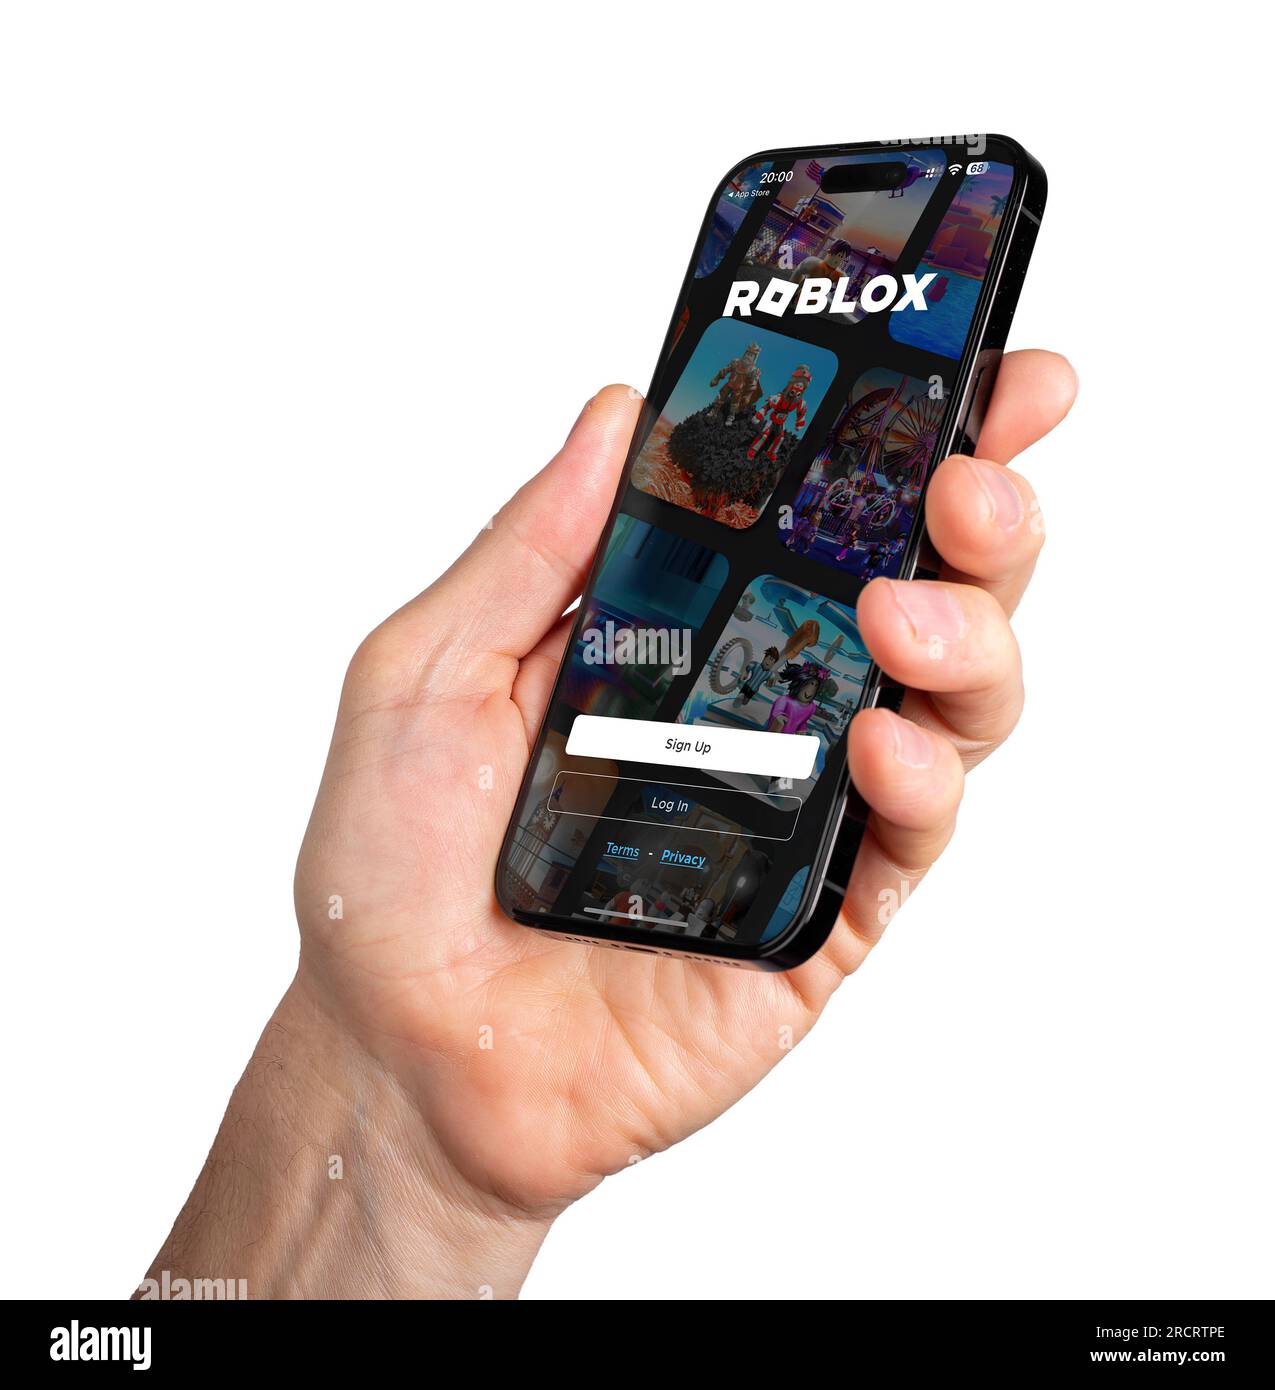 Roblox Logo and App on a Mobile Screen in a Hand Editorial Stock